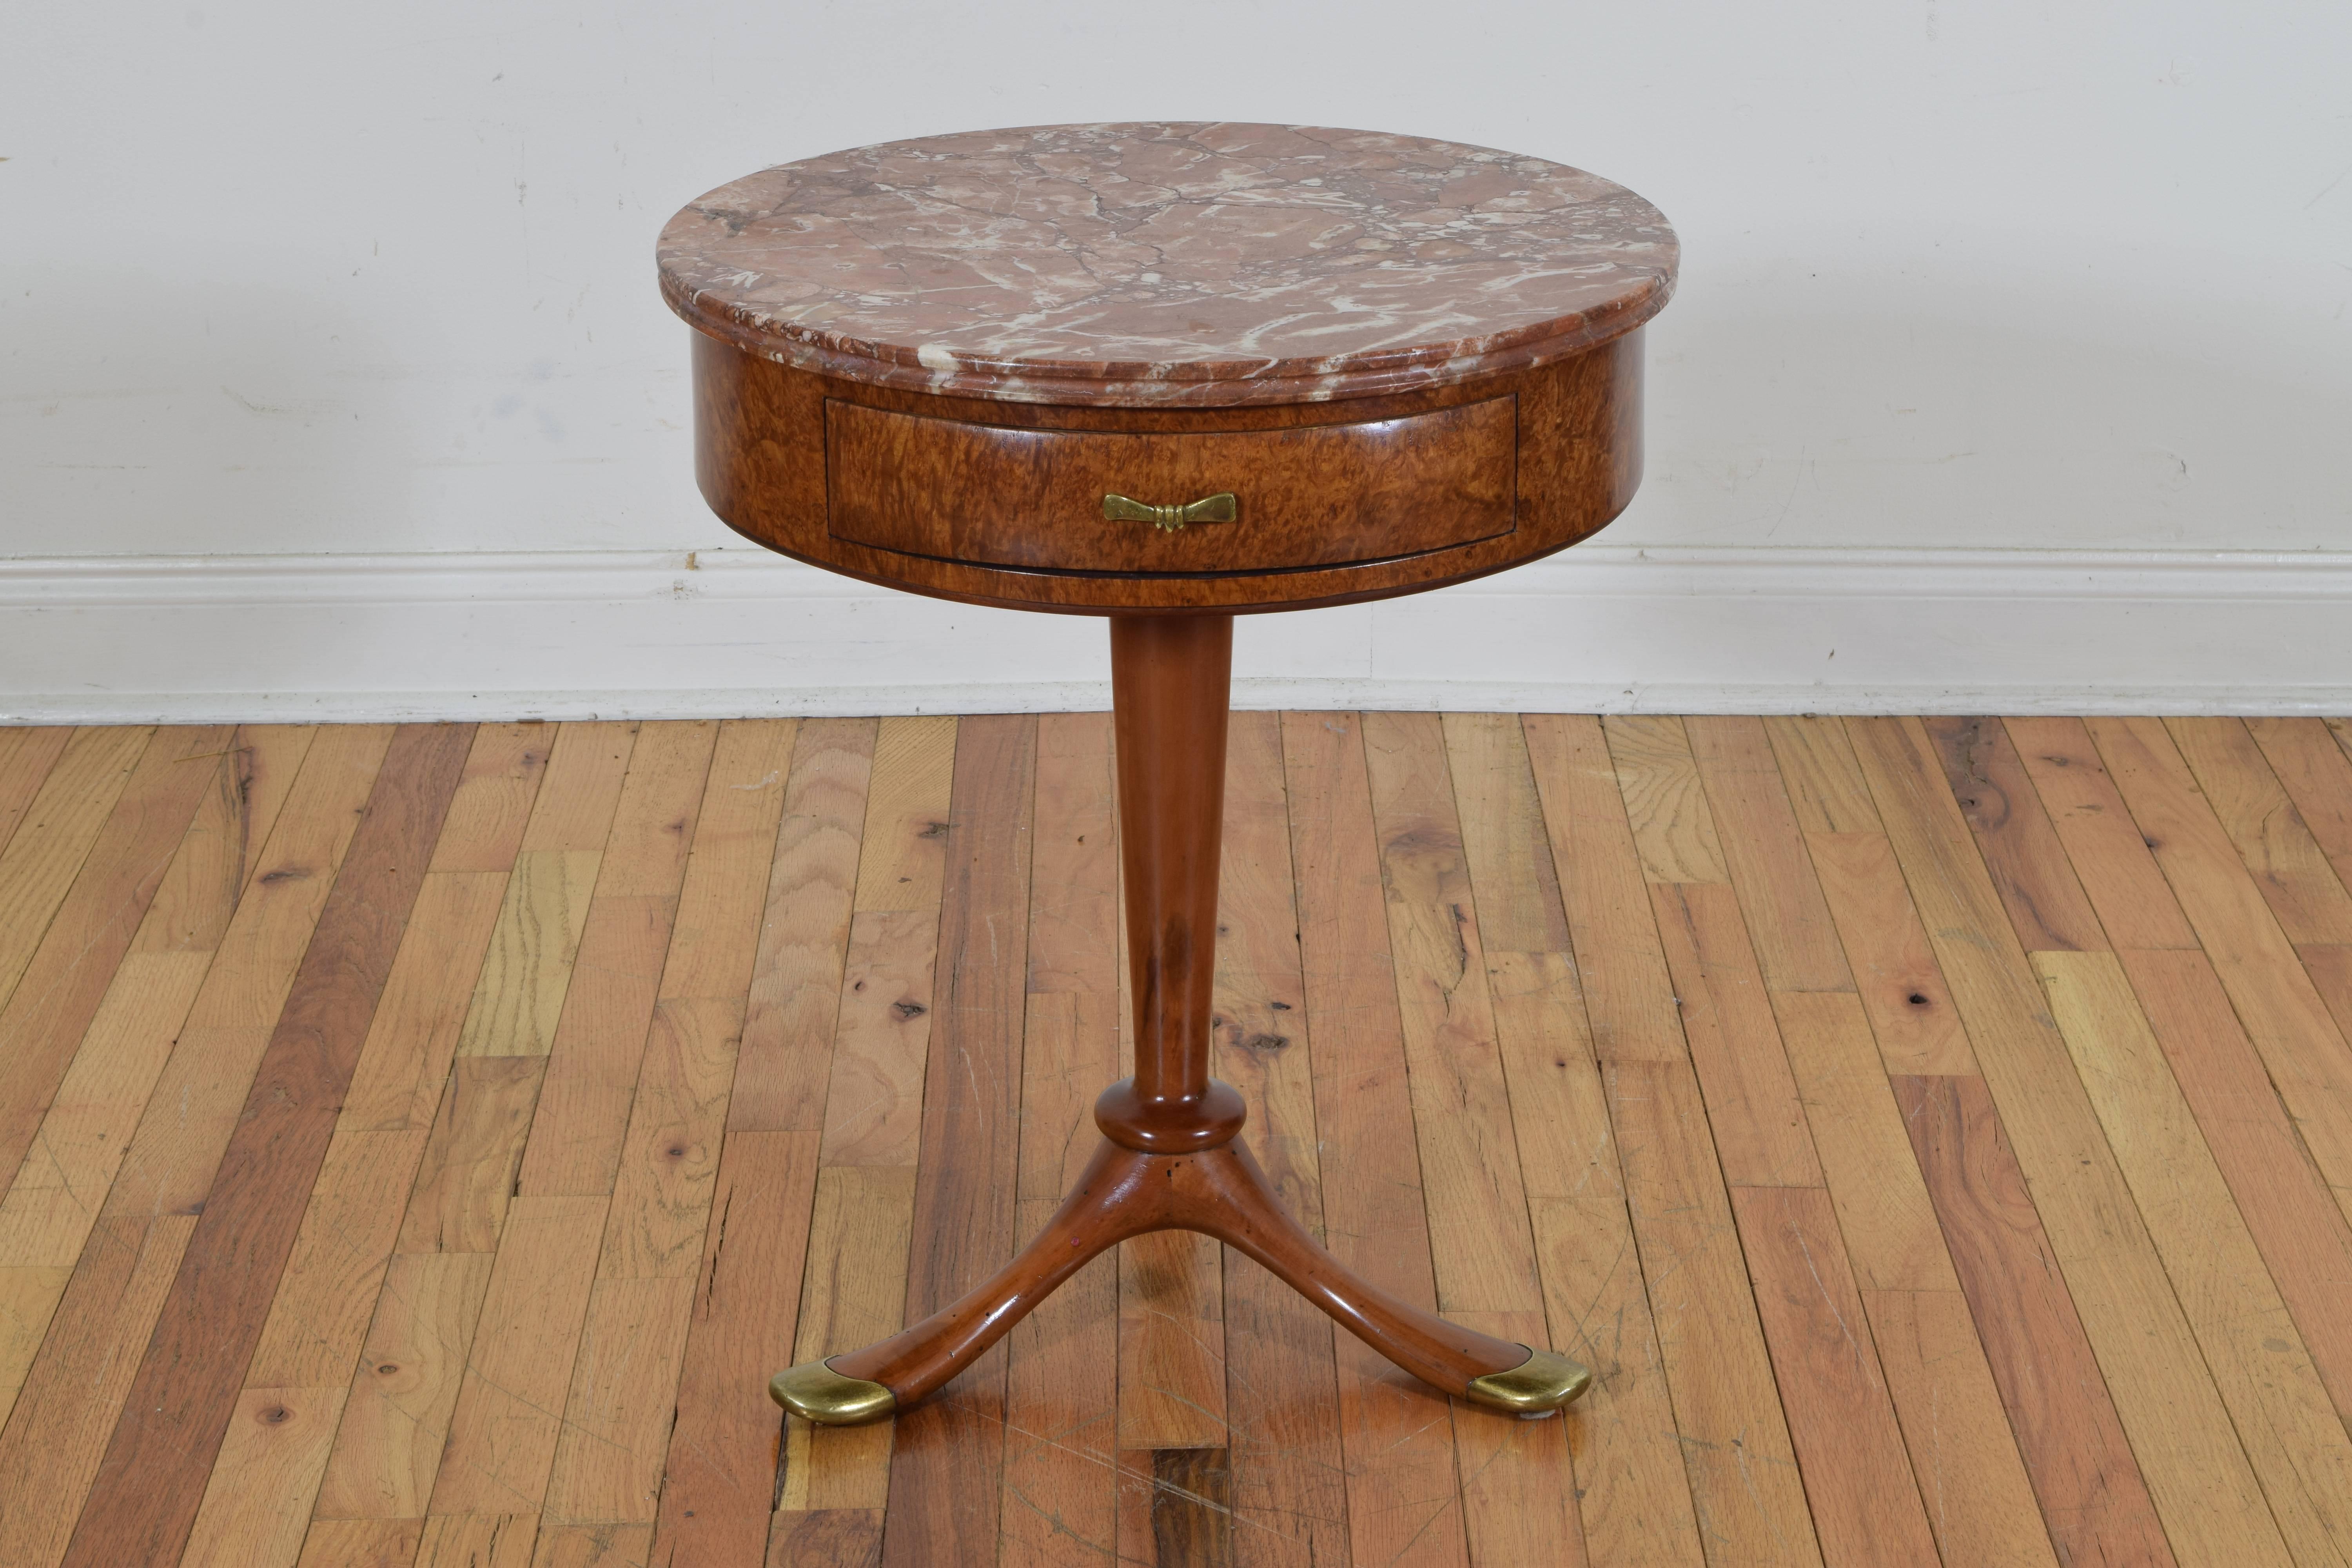 having a circular marble top with a channeled edge, the burl walnut veneered and solid walnut table having one drawer with a brass handle, raised on a tapered central column terminating in a tripartite base issuing legs with brass castors 